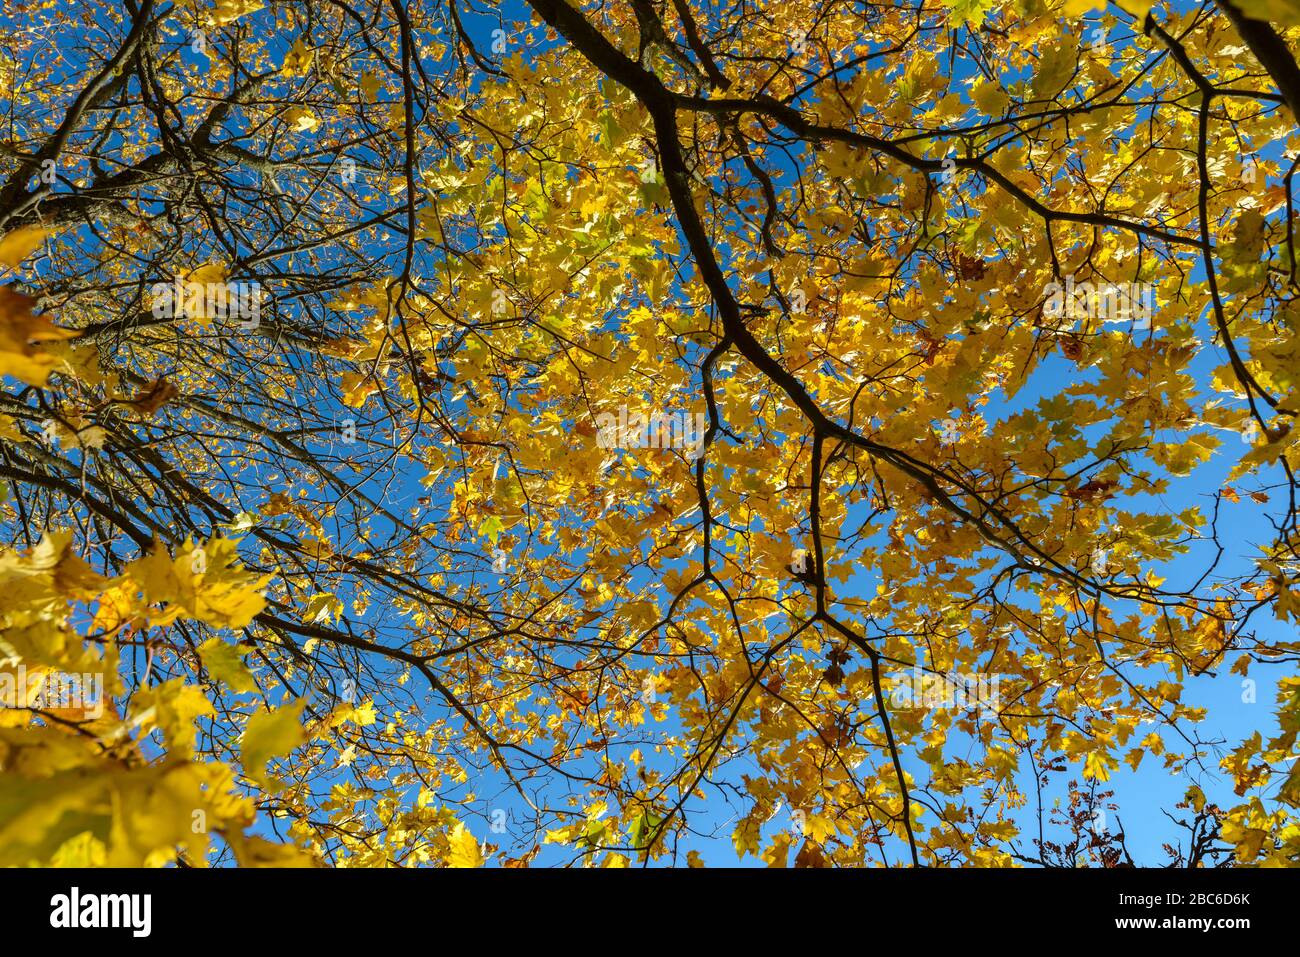 Autumn trees with vibrant yellow leaves against view of the sky Stock Photo